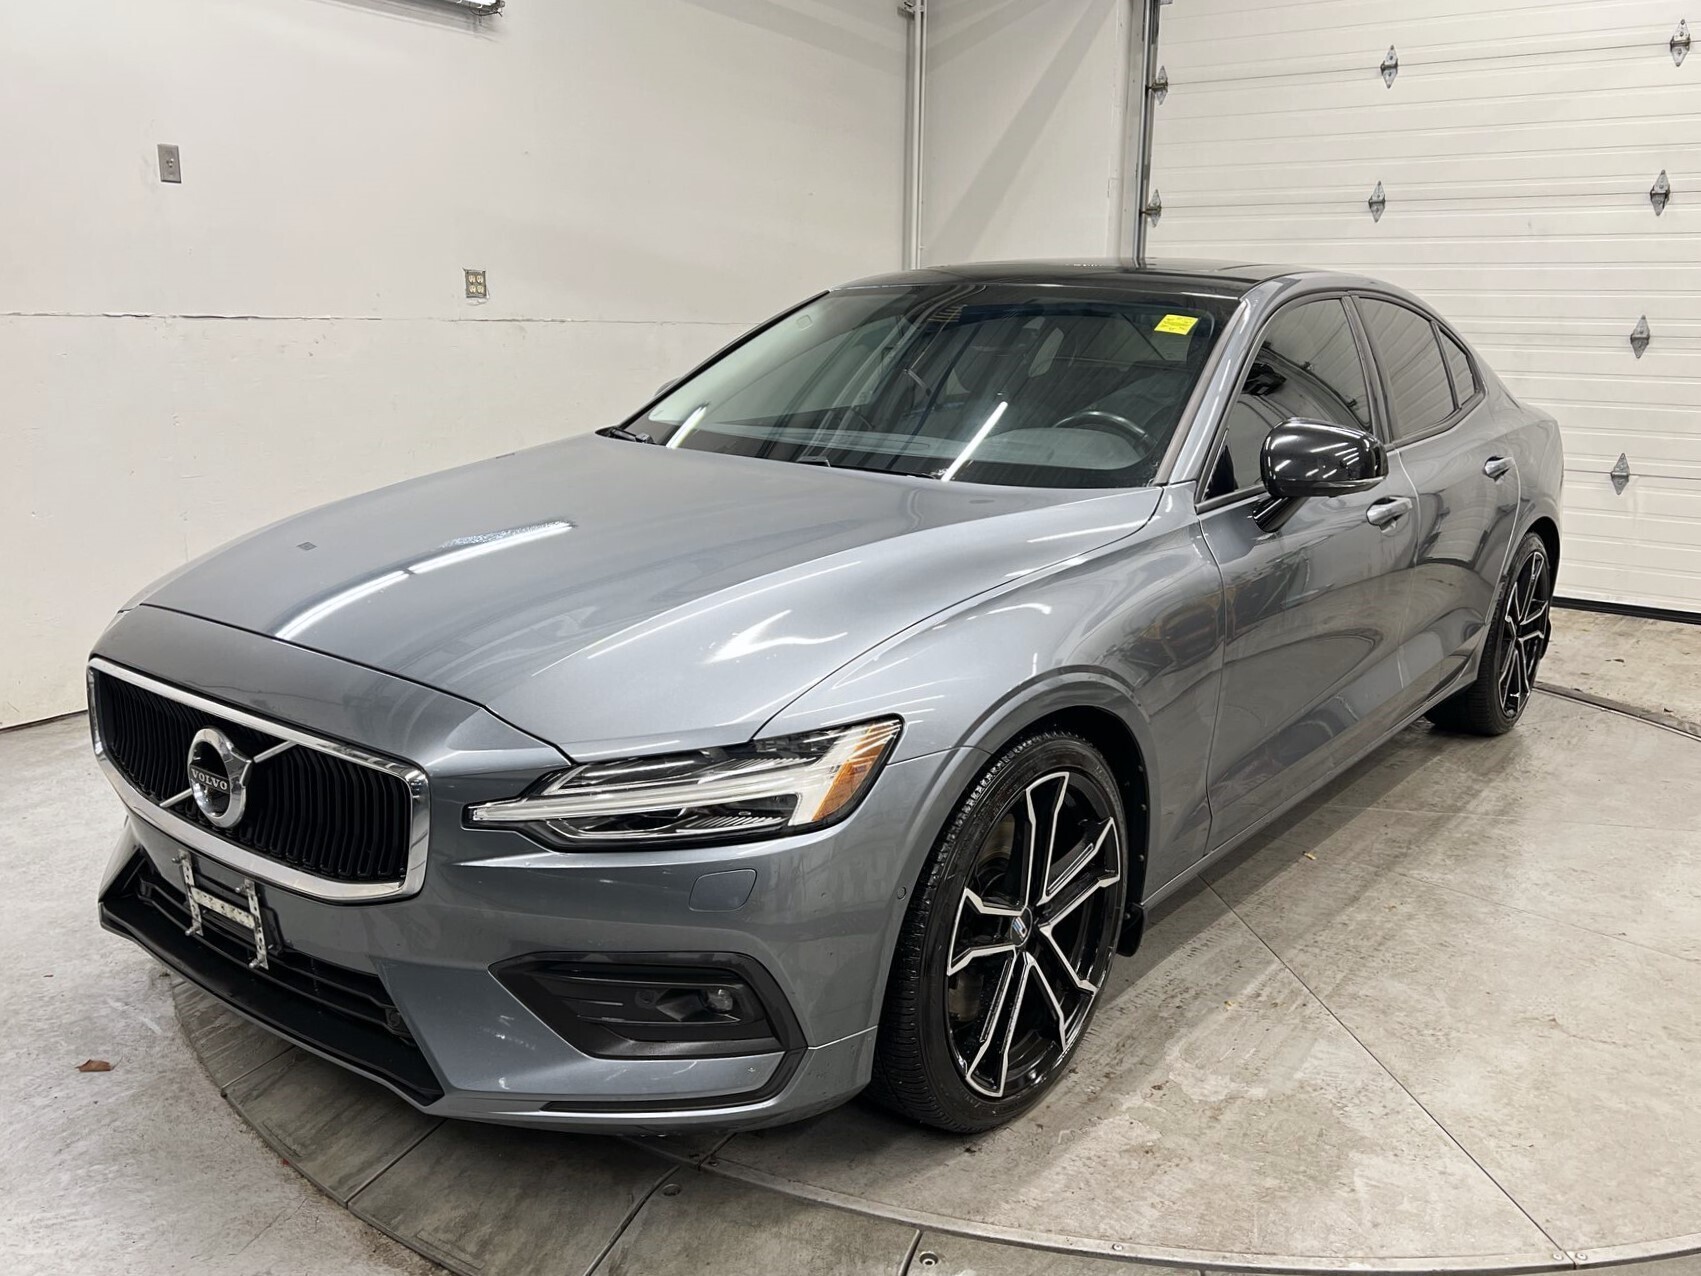 2019 Volvo S60 T6 AWD| 316HP |PANO ROOF |LEATHER |NAV |BLIND SPOT